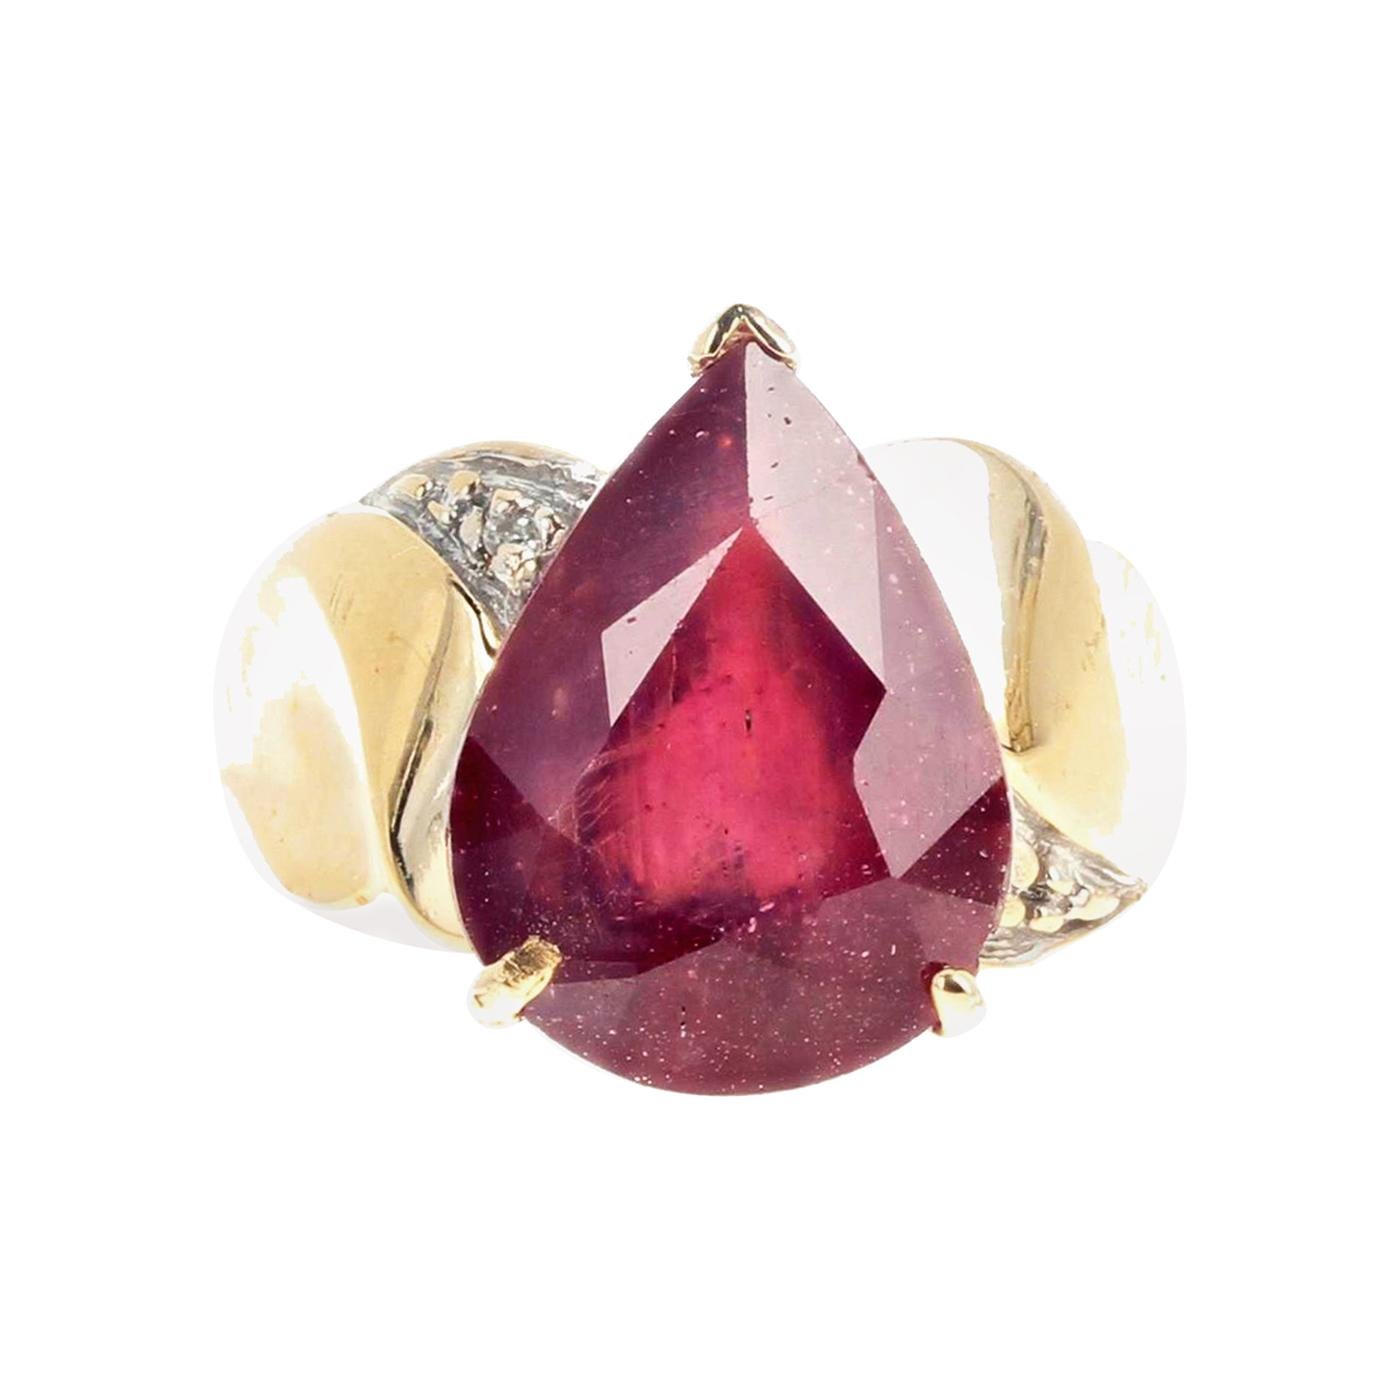 AJD Intense GLOWING Red 7.78 Ct. Natural Sapphire & Diamond 14K Yellow Gold Ring